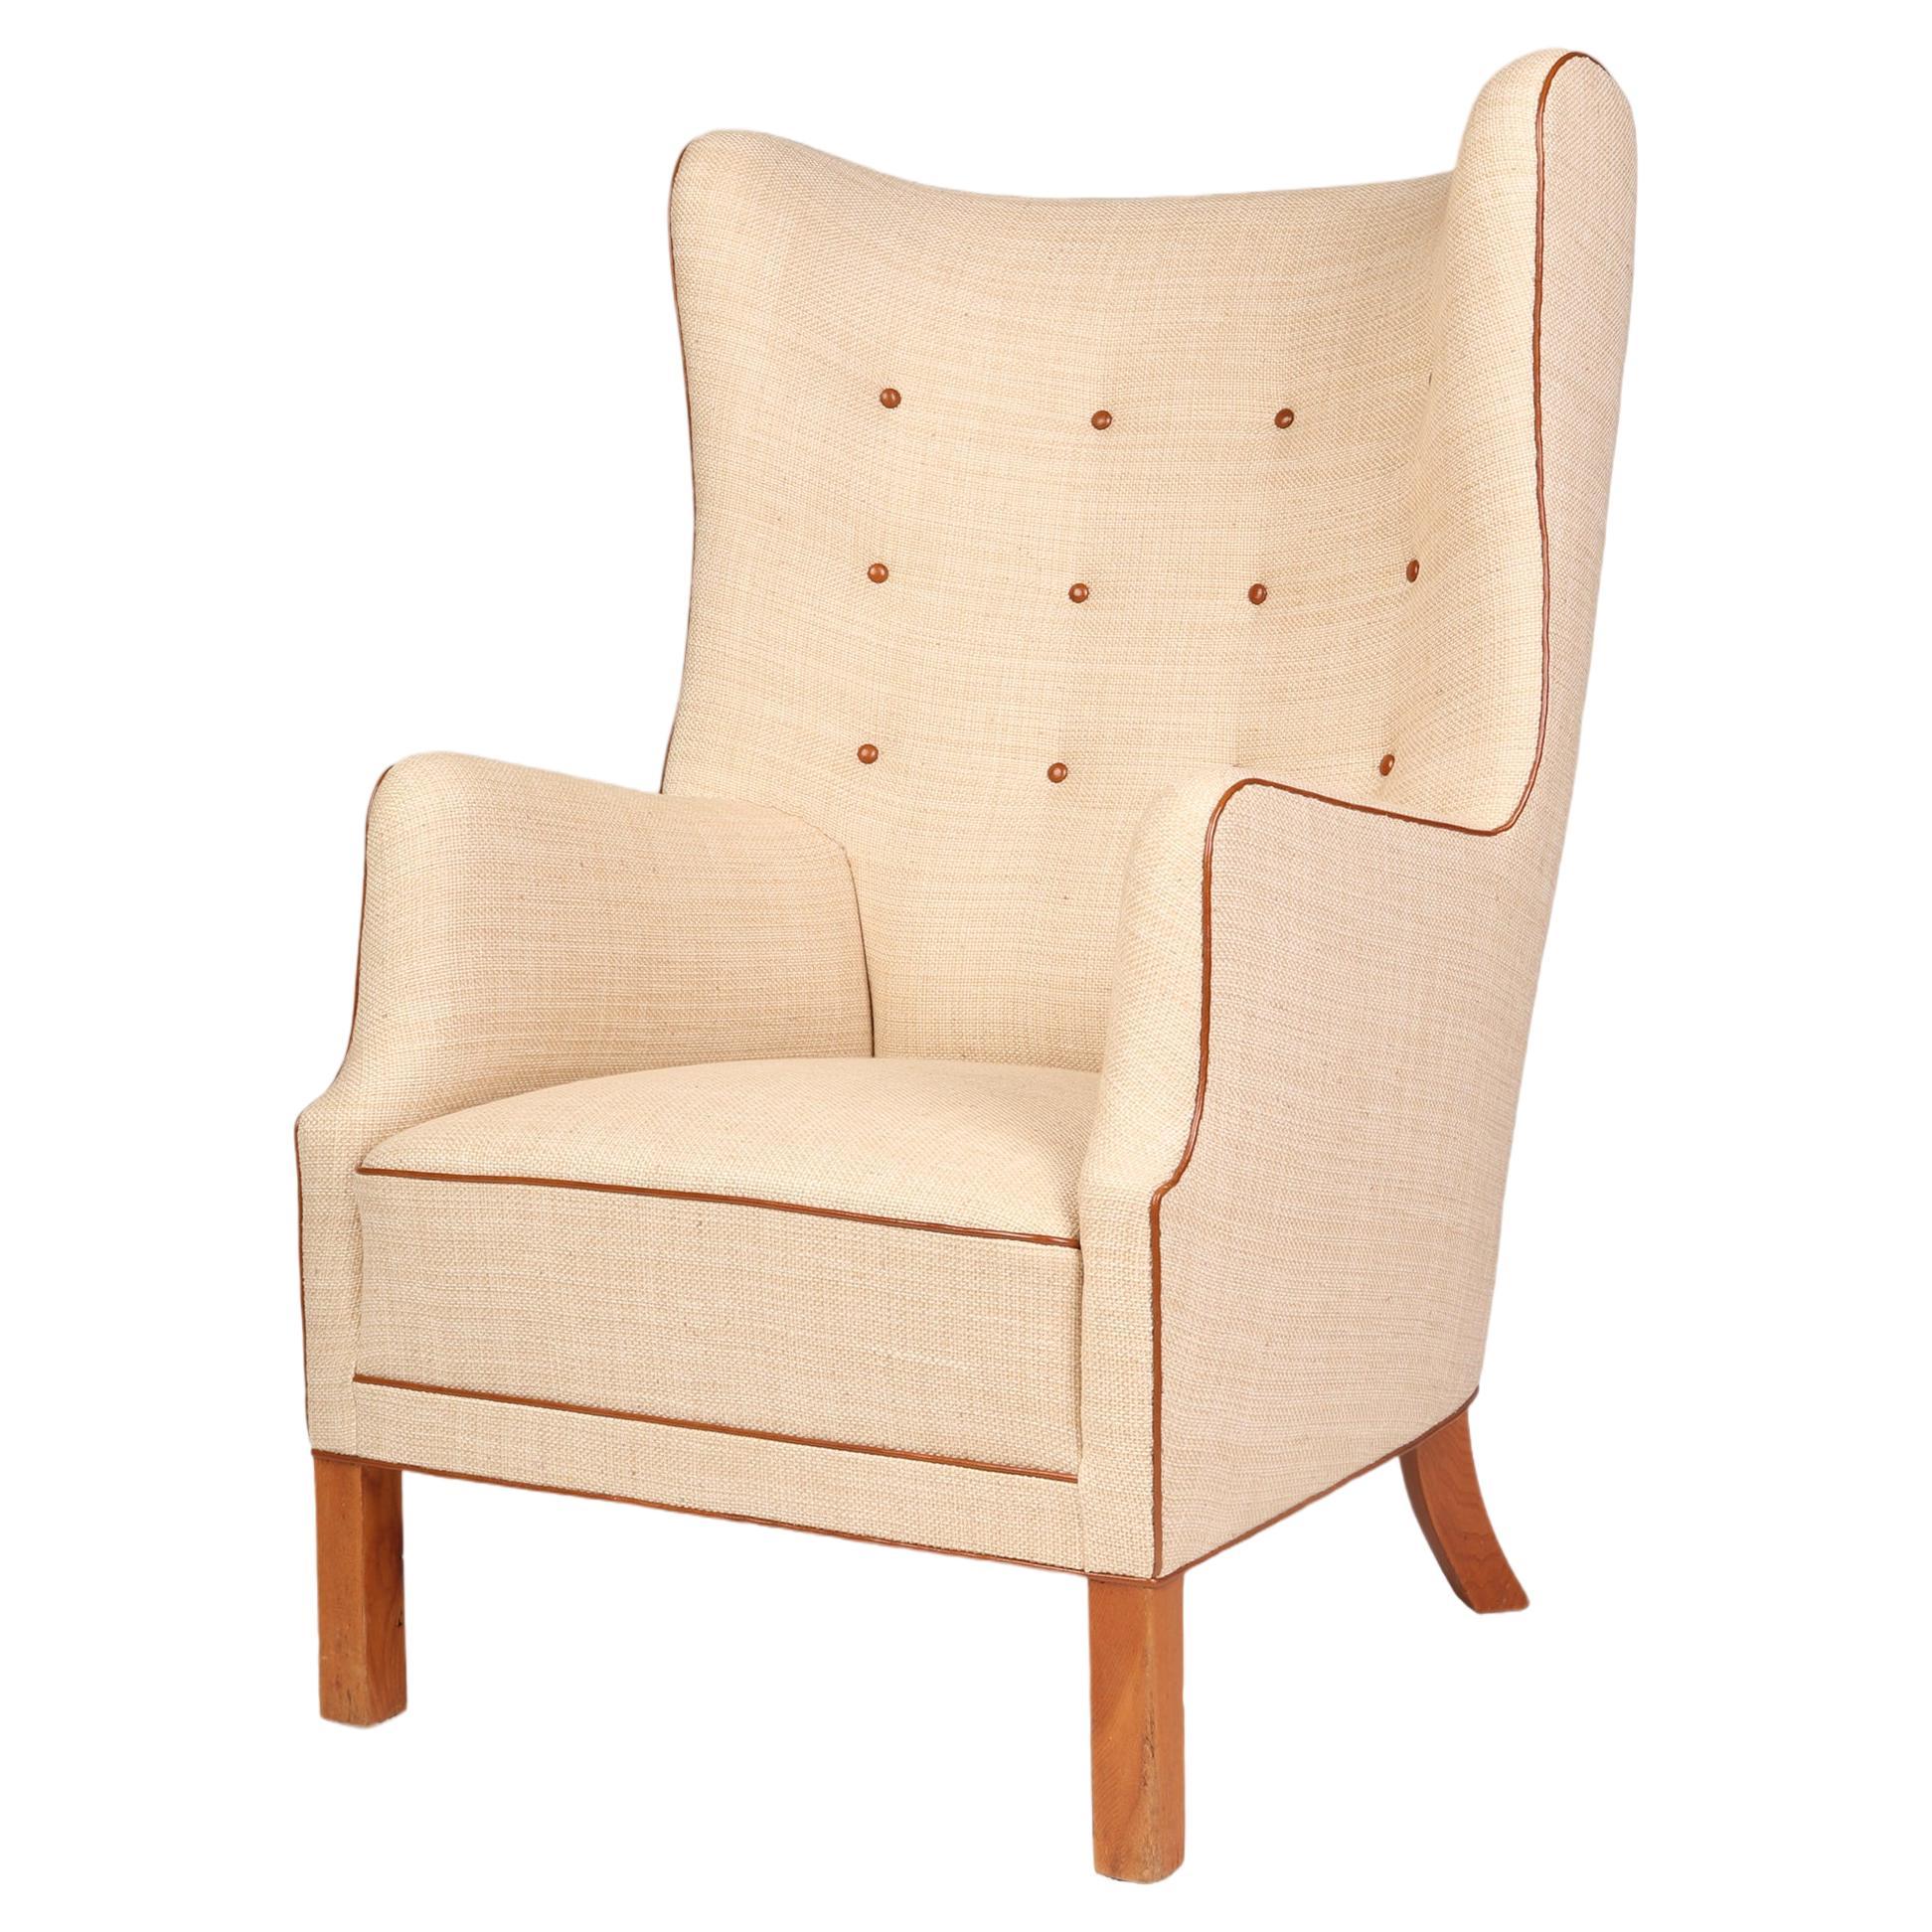 Danish wingback armchair with off-white canvas, Niger leather details, elm legs